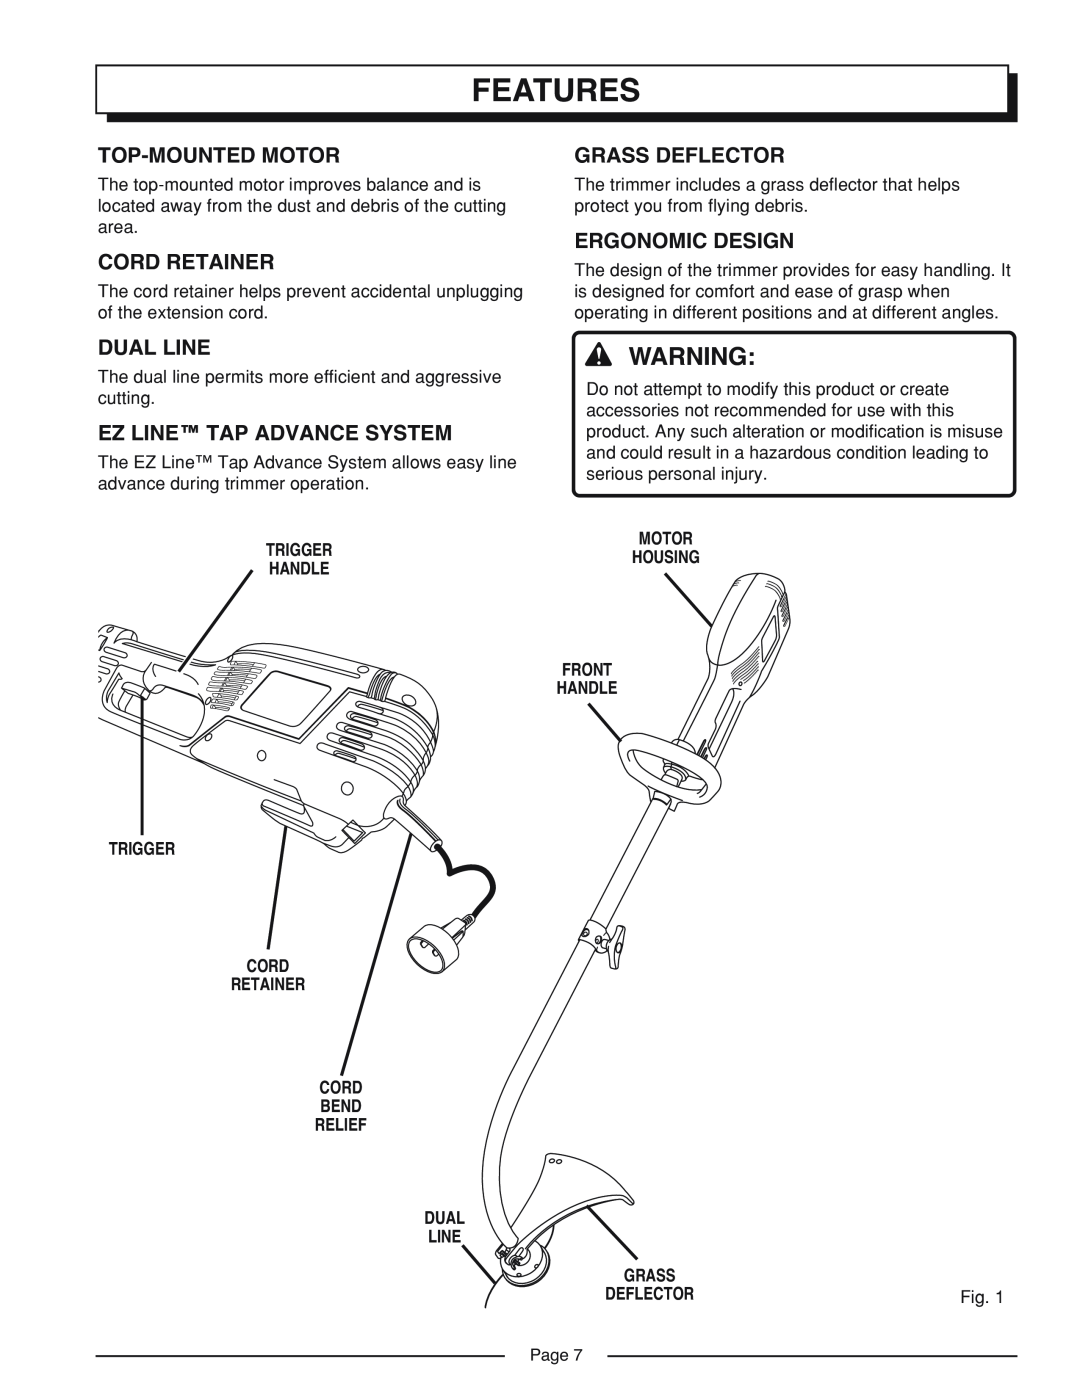 Homelite UT41002A manual Features, Top-Mounted Motor, Cord Retainer, Grass Deflector, Ergonomic Design, Dual Line, Page 